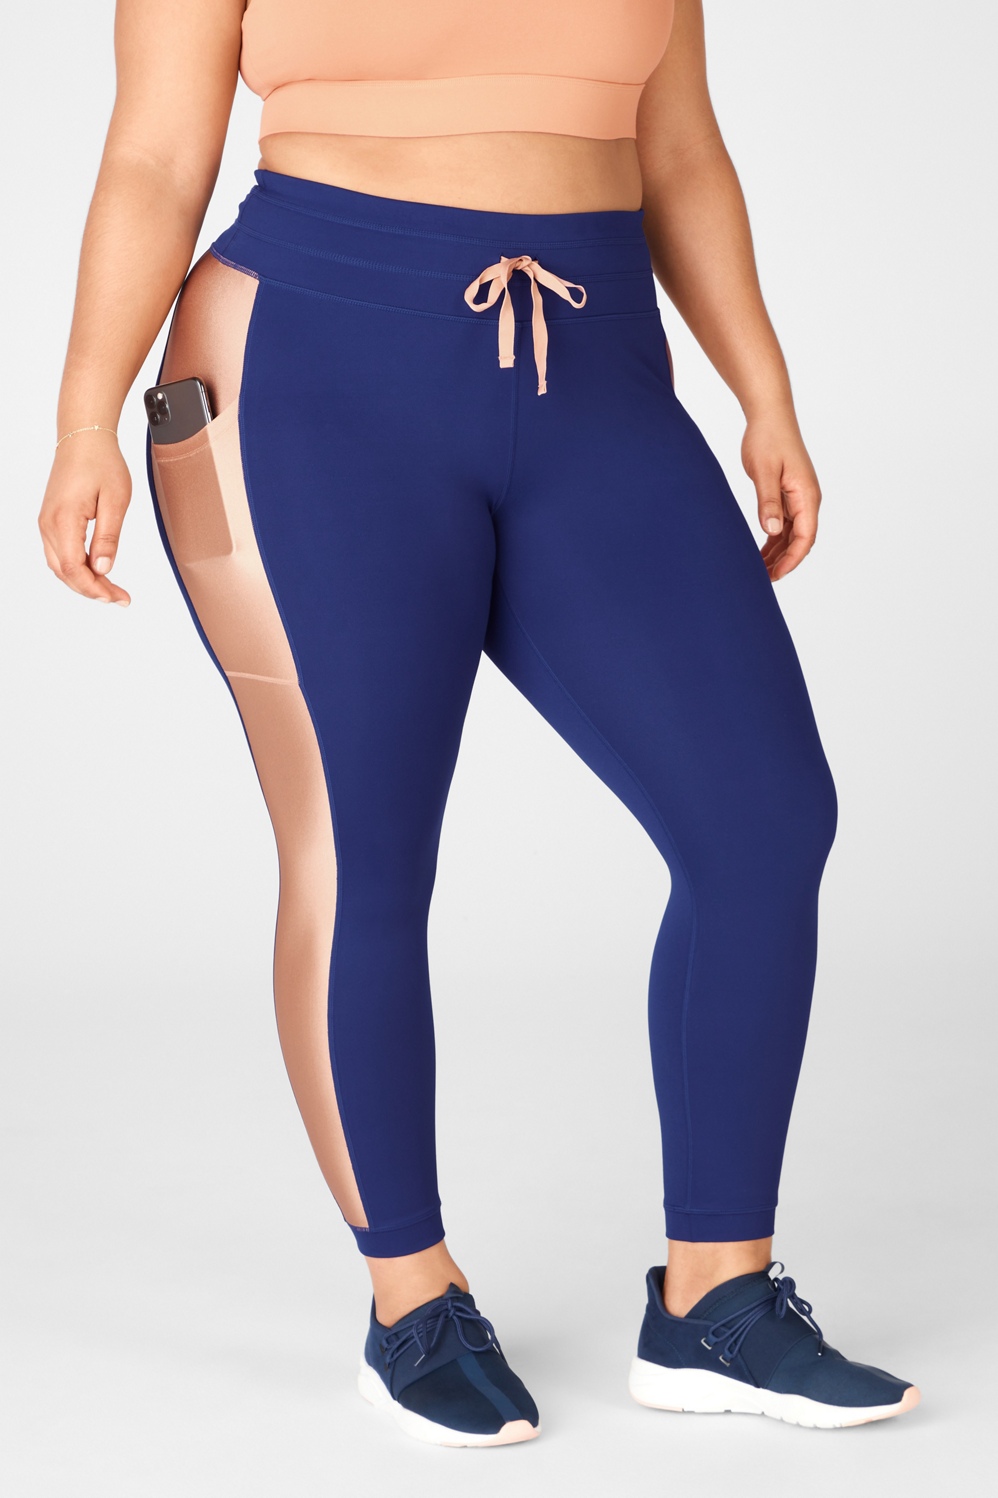 Fabletics Define Powerhold Mid-Rise Capri Leggings Size XS Blue - $15 (70%  Off Retail) - From Brittany